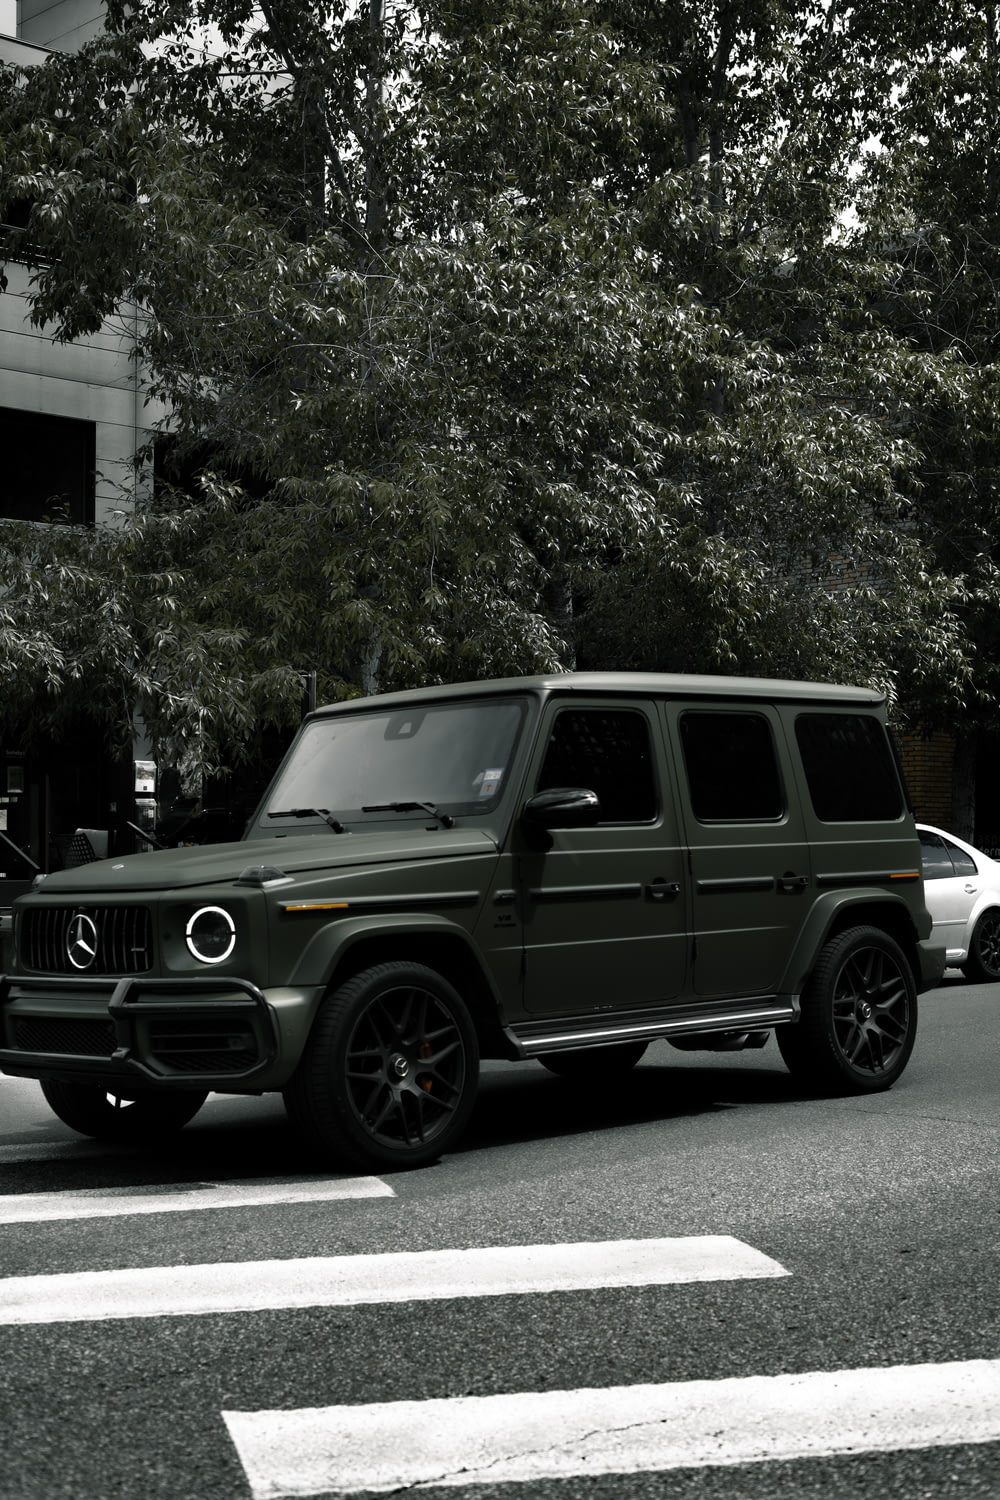 black jeep wrangler parked near green trees during daytime